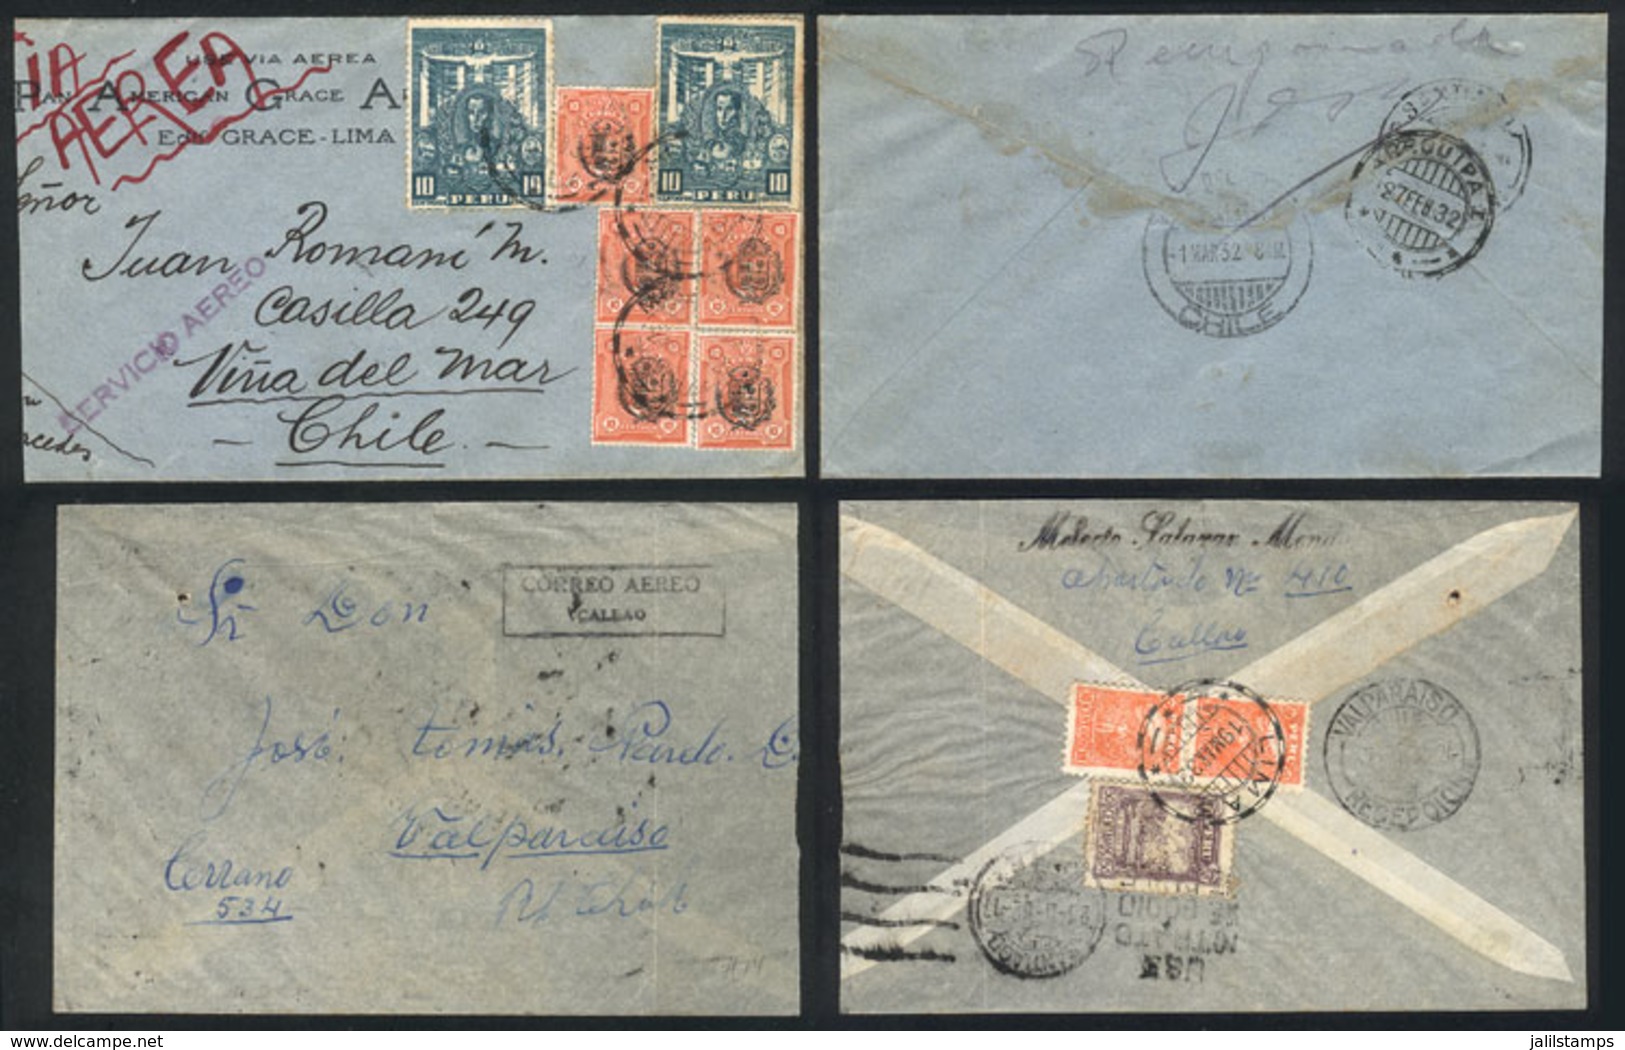 PERU: 27/FE And 19/MAR/1932 Arequipa - Viña Del Mar And Callao - Valparaiso, 2 Airmail Covers Franked With New Rate Of 7 - Perú